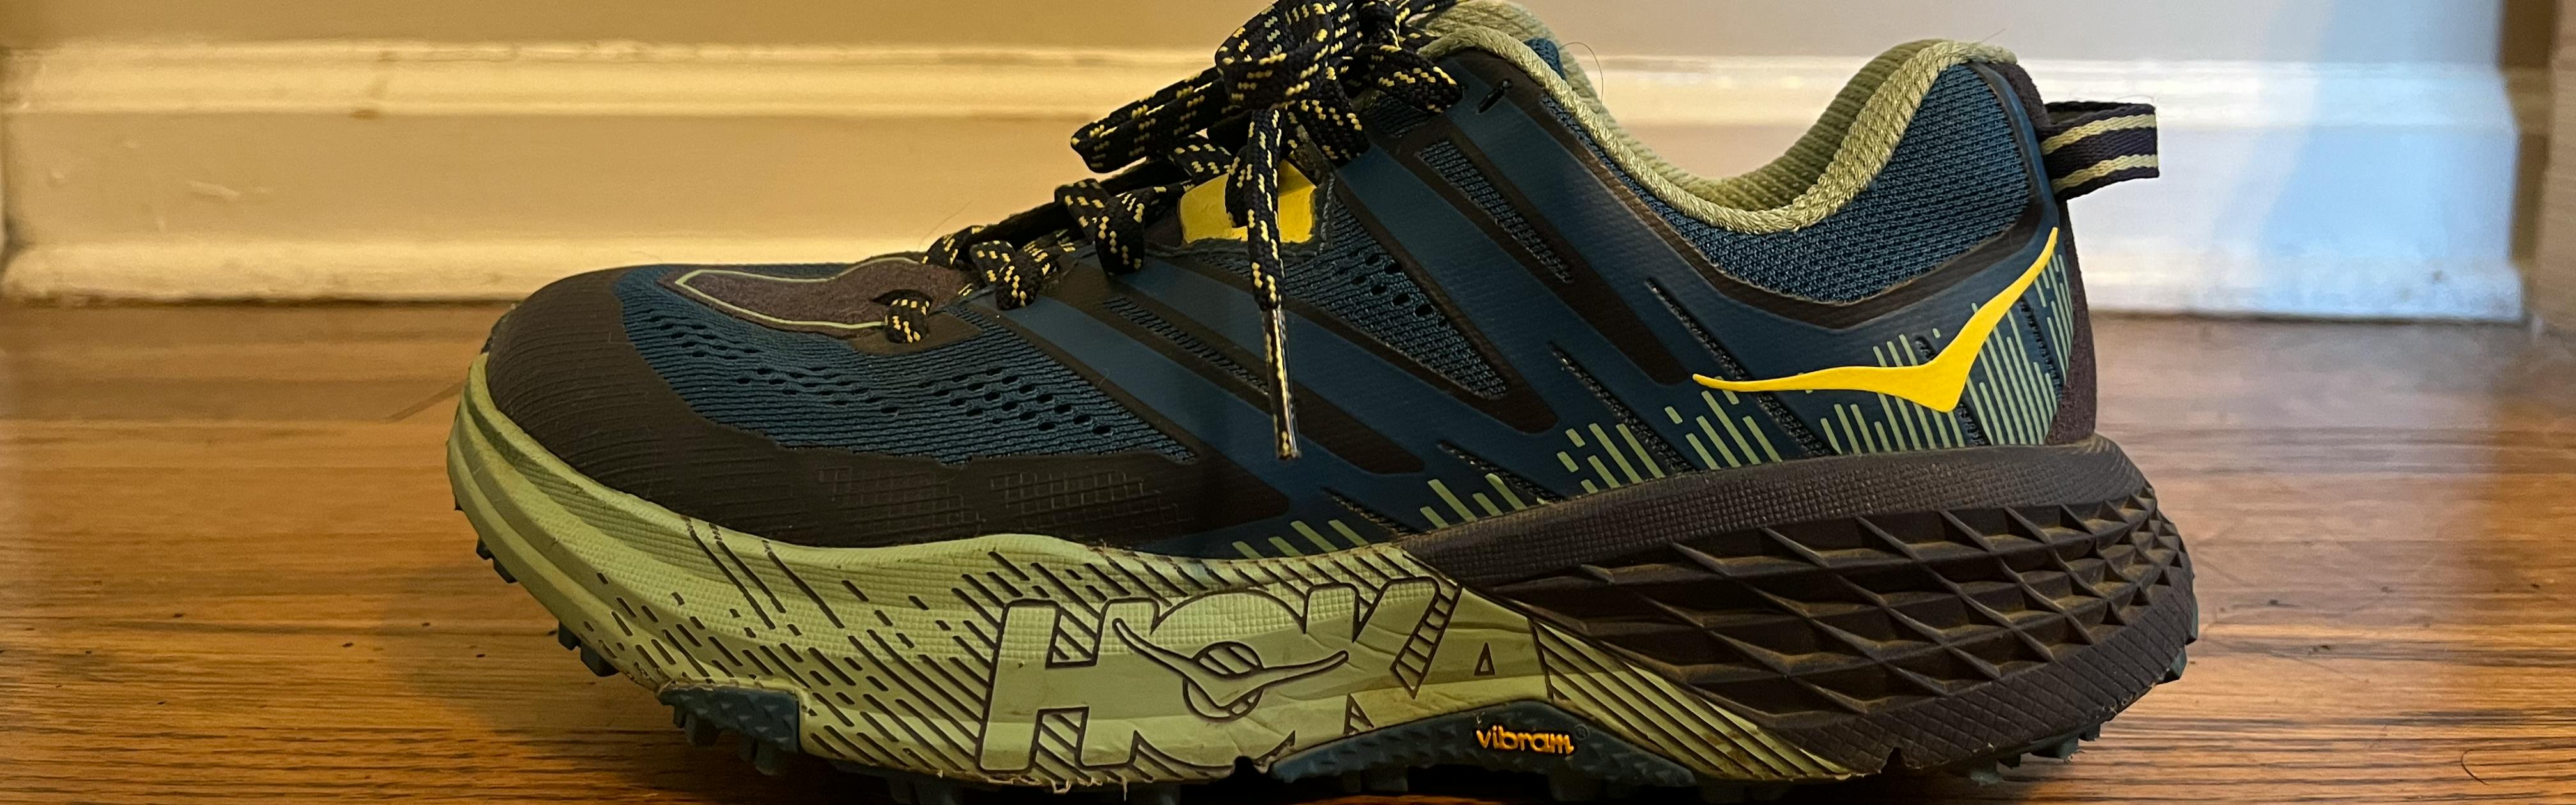 Side profile of the Hoka One One Speedgoat 3 Trail Running Shoes.